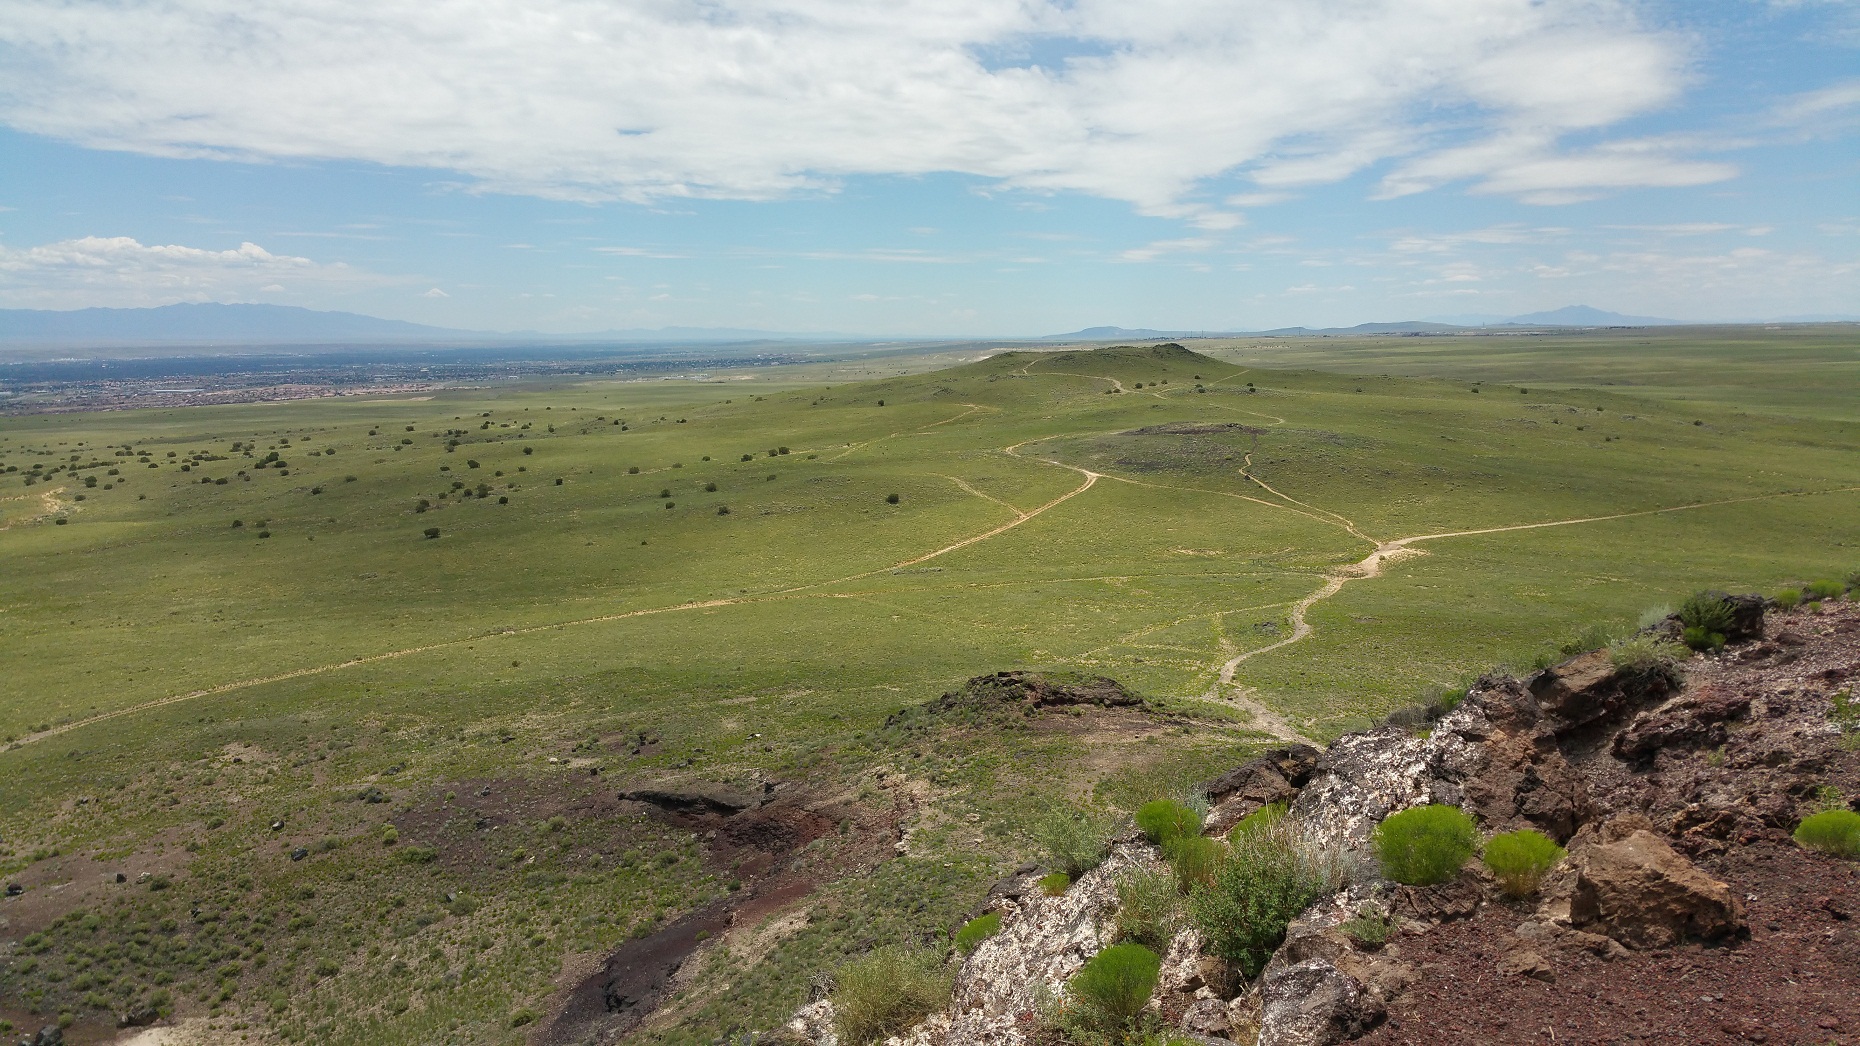 Volcanoes Day Use Area trail at Petroglyph National Monument (courtesy of NPS)